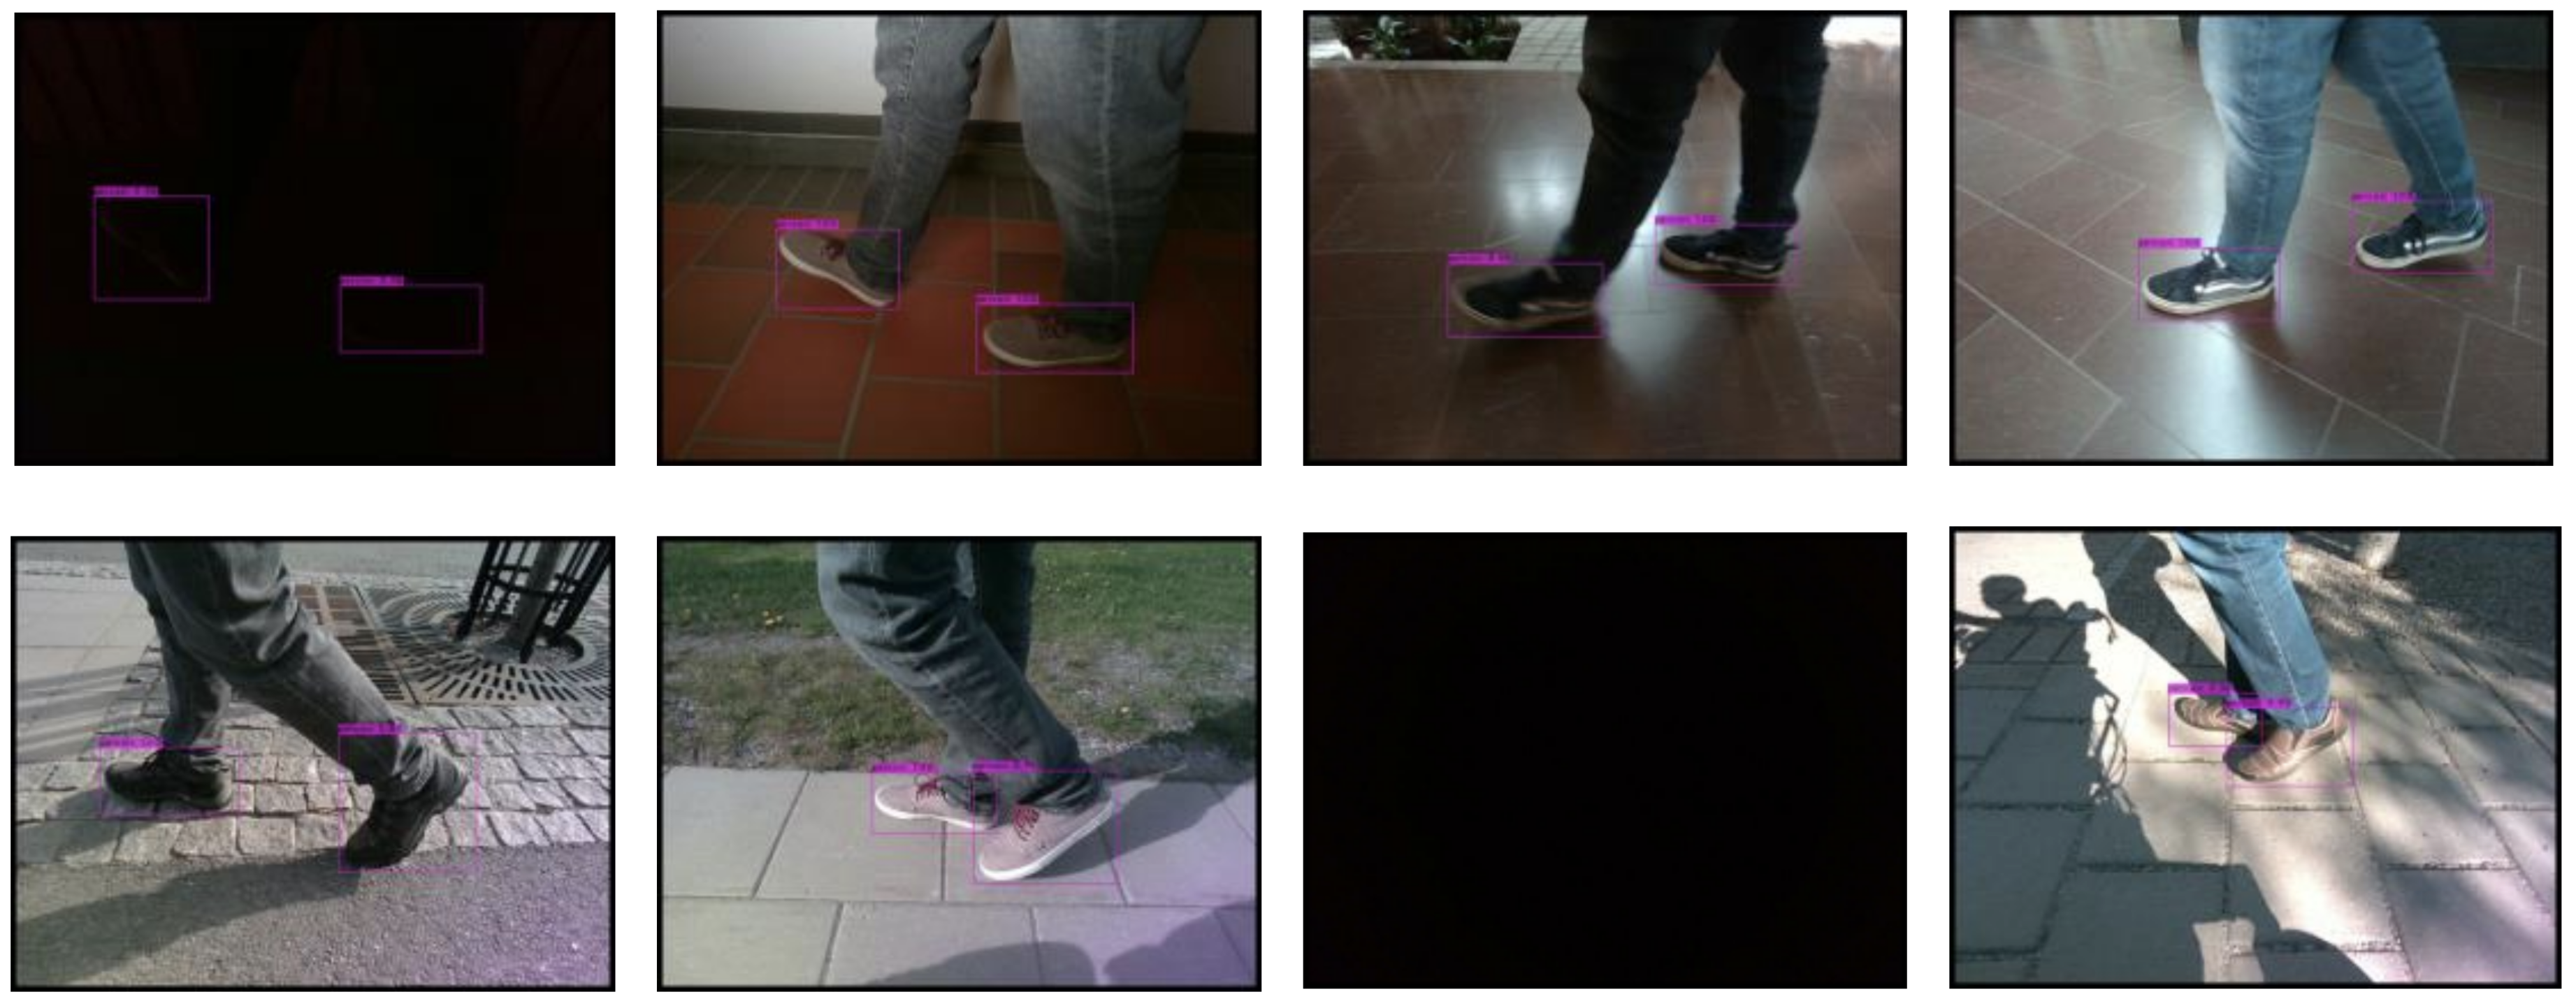 Feet identification in images captured by a wheelchair mounted cameras.  Top left shows a false positive.  The control system will have to deal with both spurious detections and missed detections.